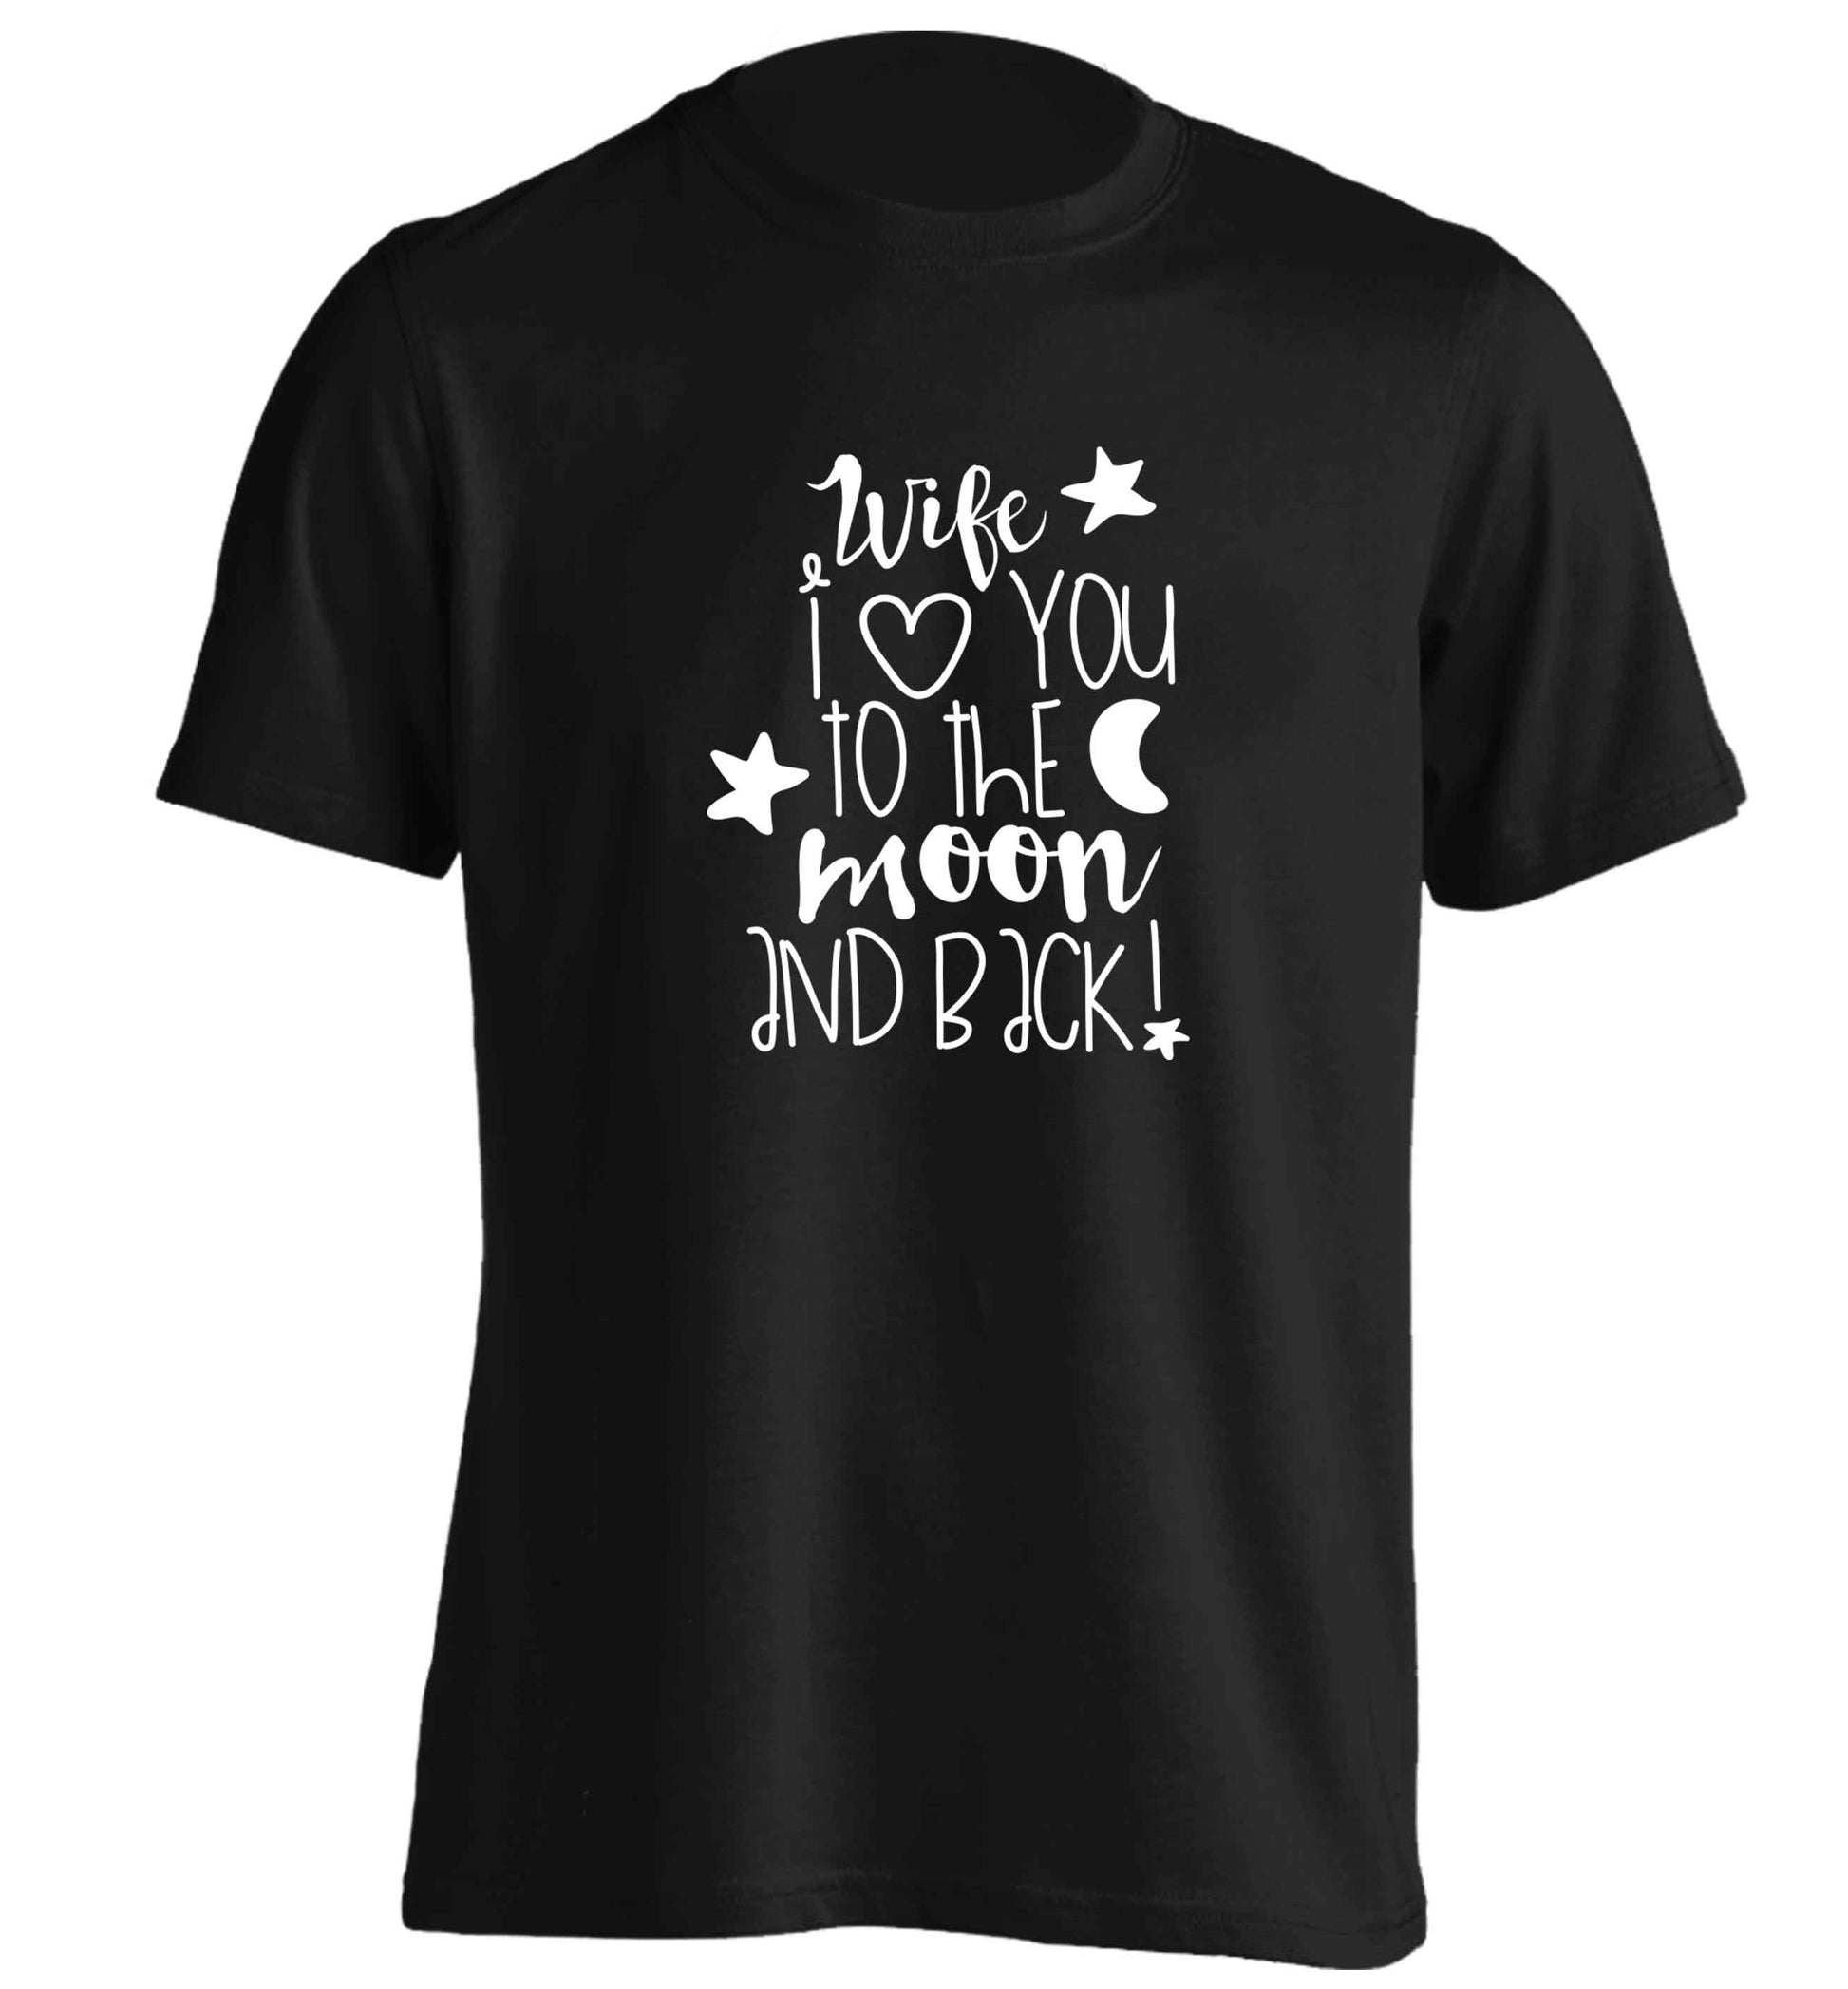 Wife I love you to the moon and back adults unisex black Tshirt 2XL